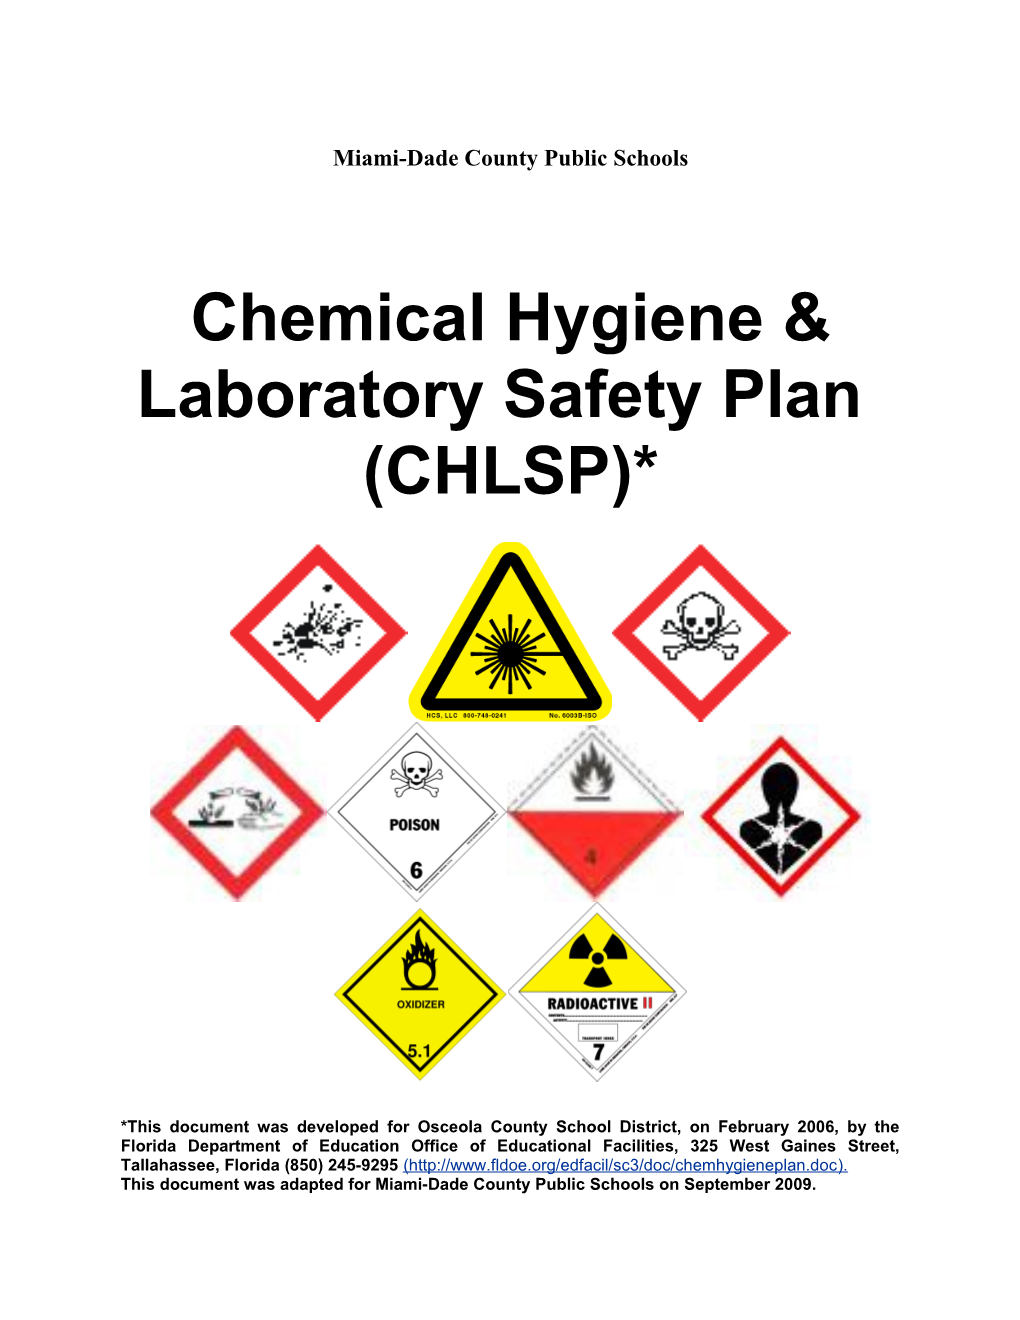 Chemistry Safety Issues